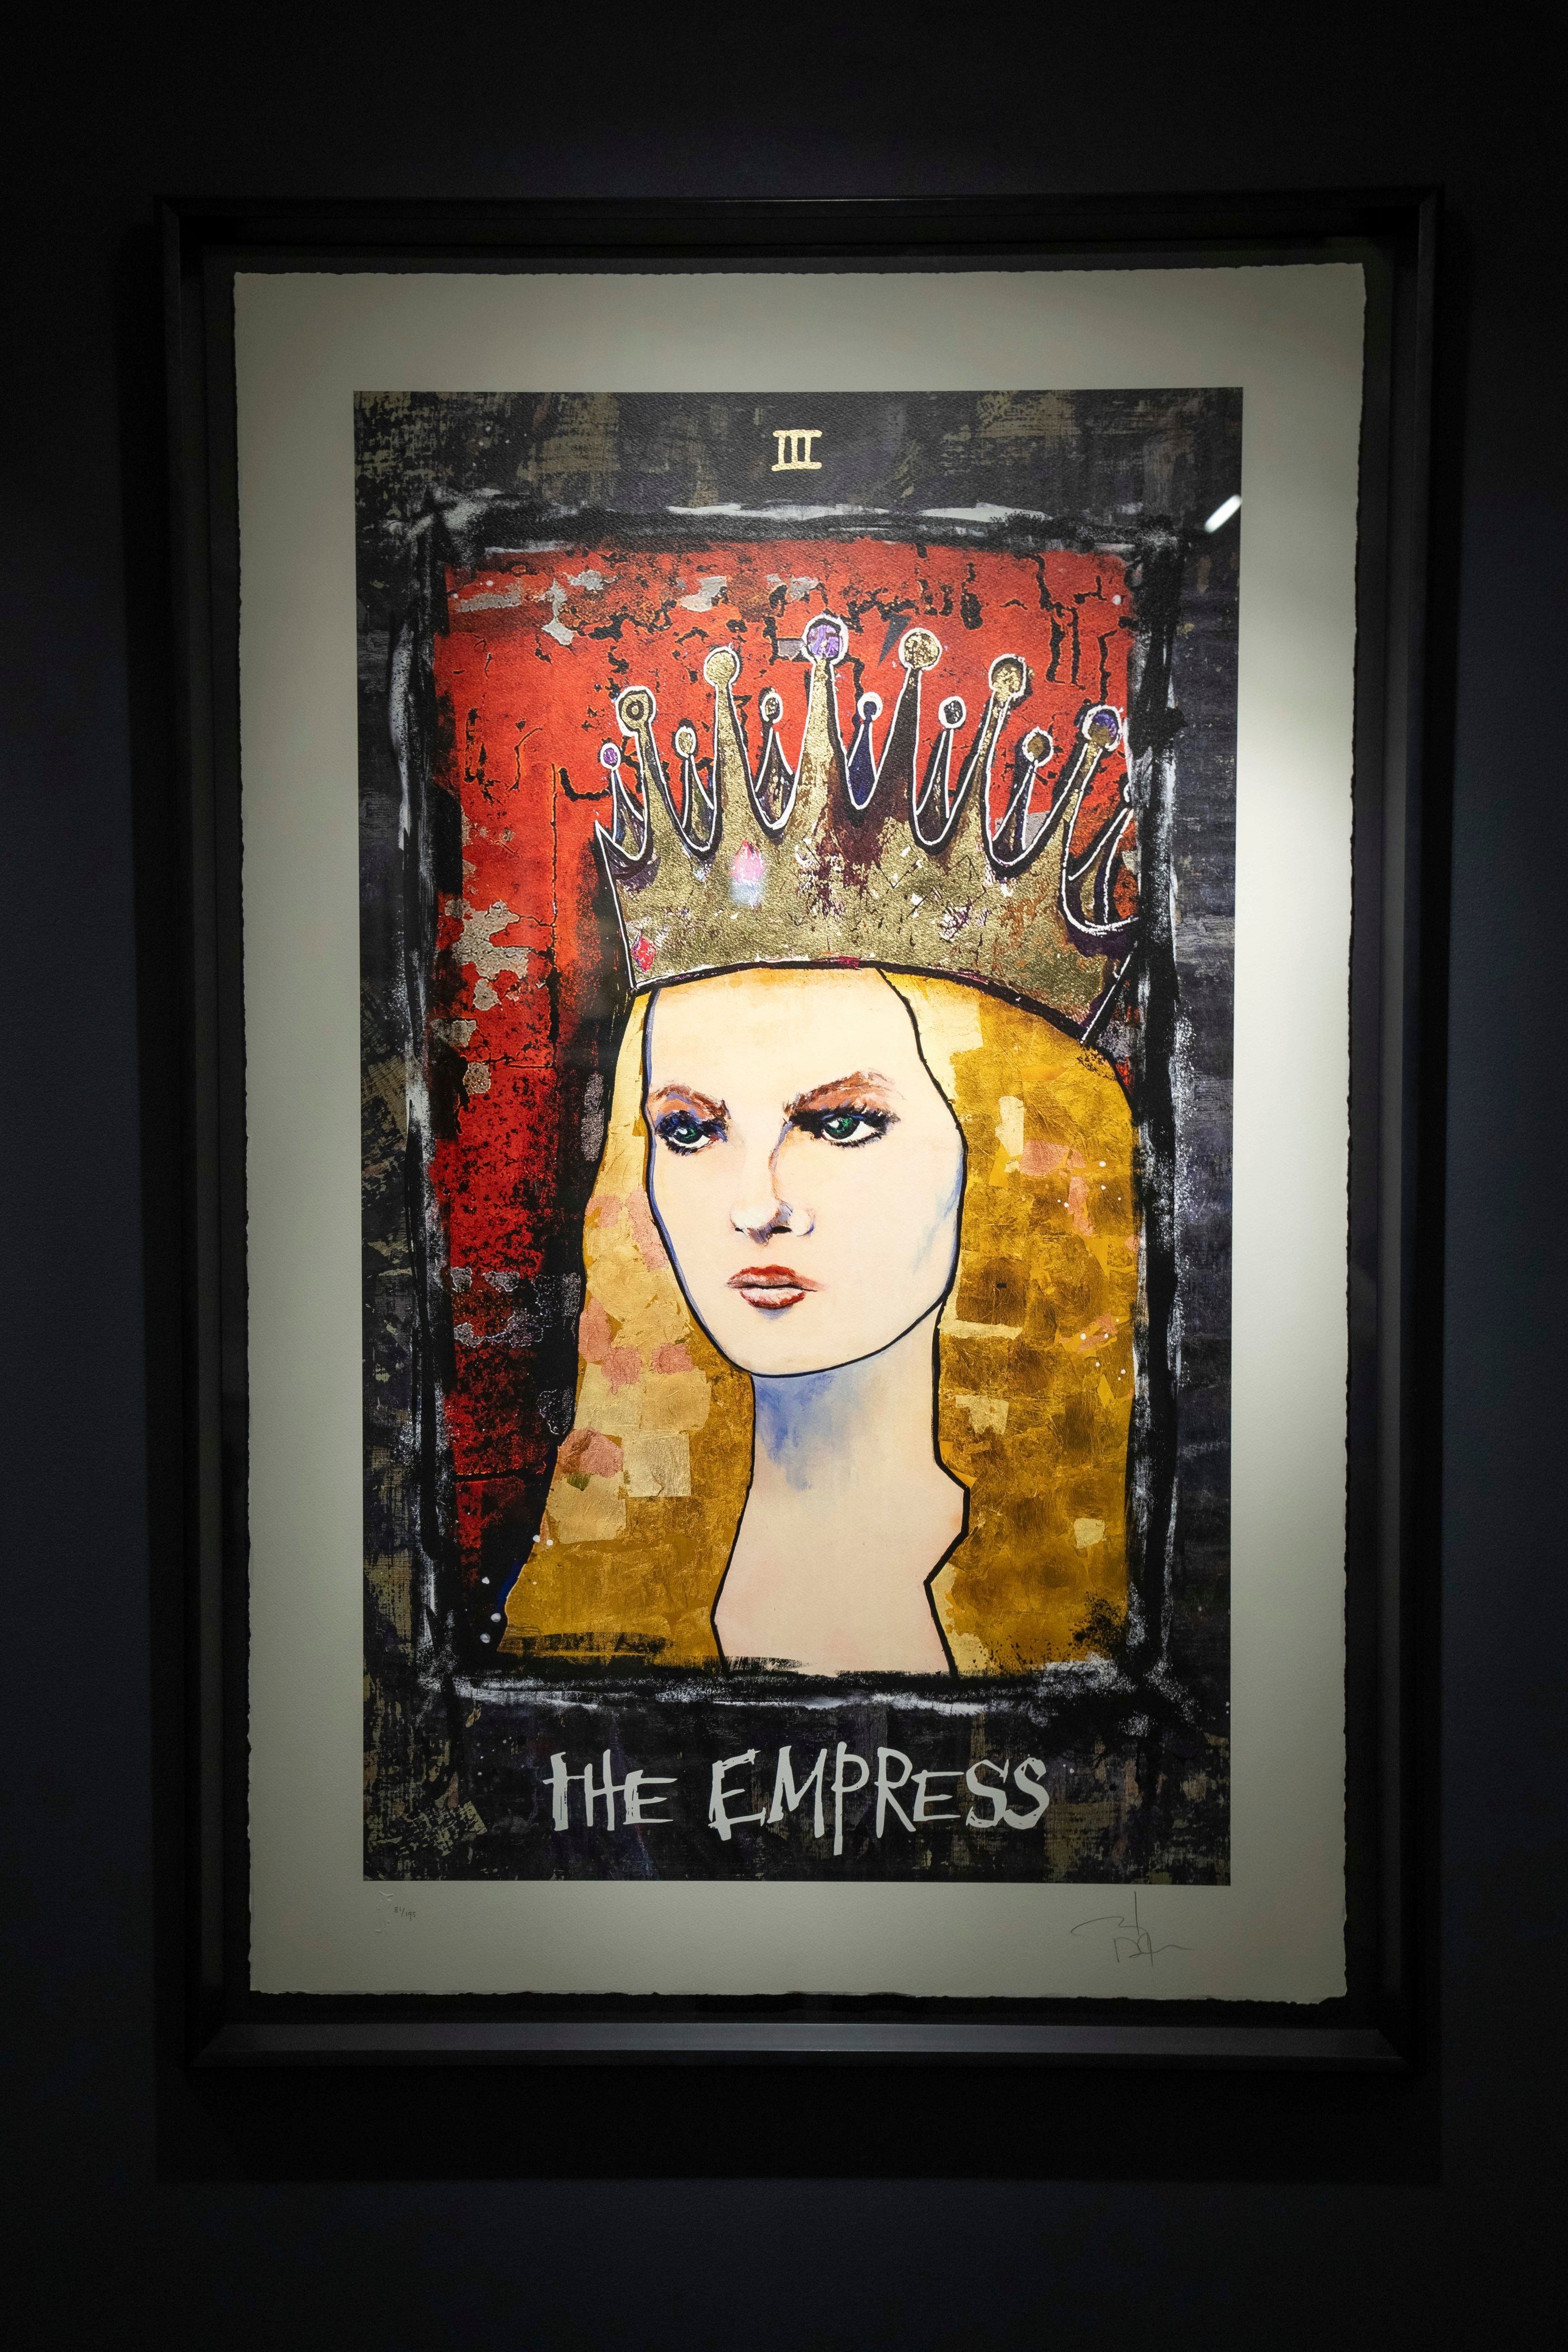 Detail from The Empress, depicting Vanessa Paradis, from the Tarot collection by actor Johnny Depp is displayed at Castle Fine Art in London. Photo: Scott A Garfitt/Invision/AP